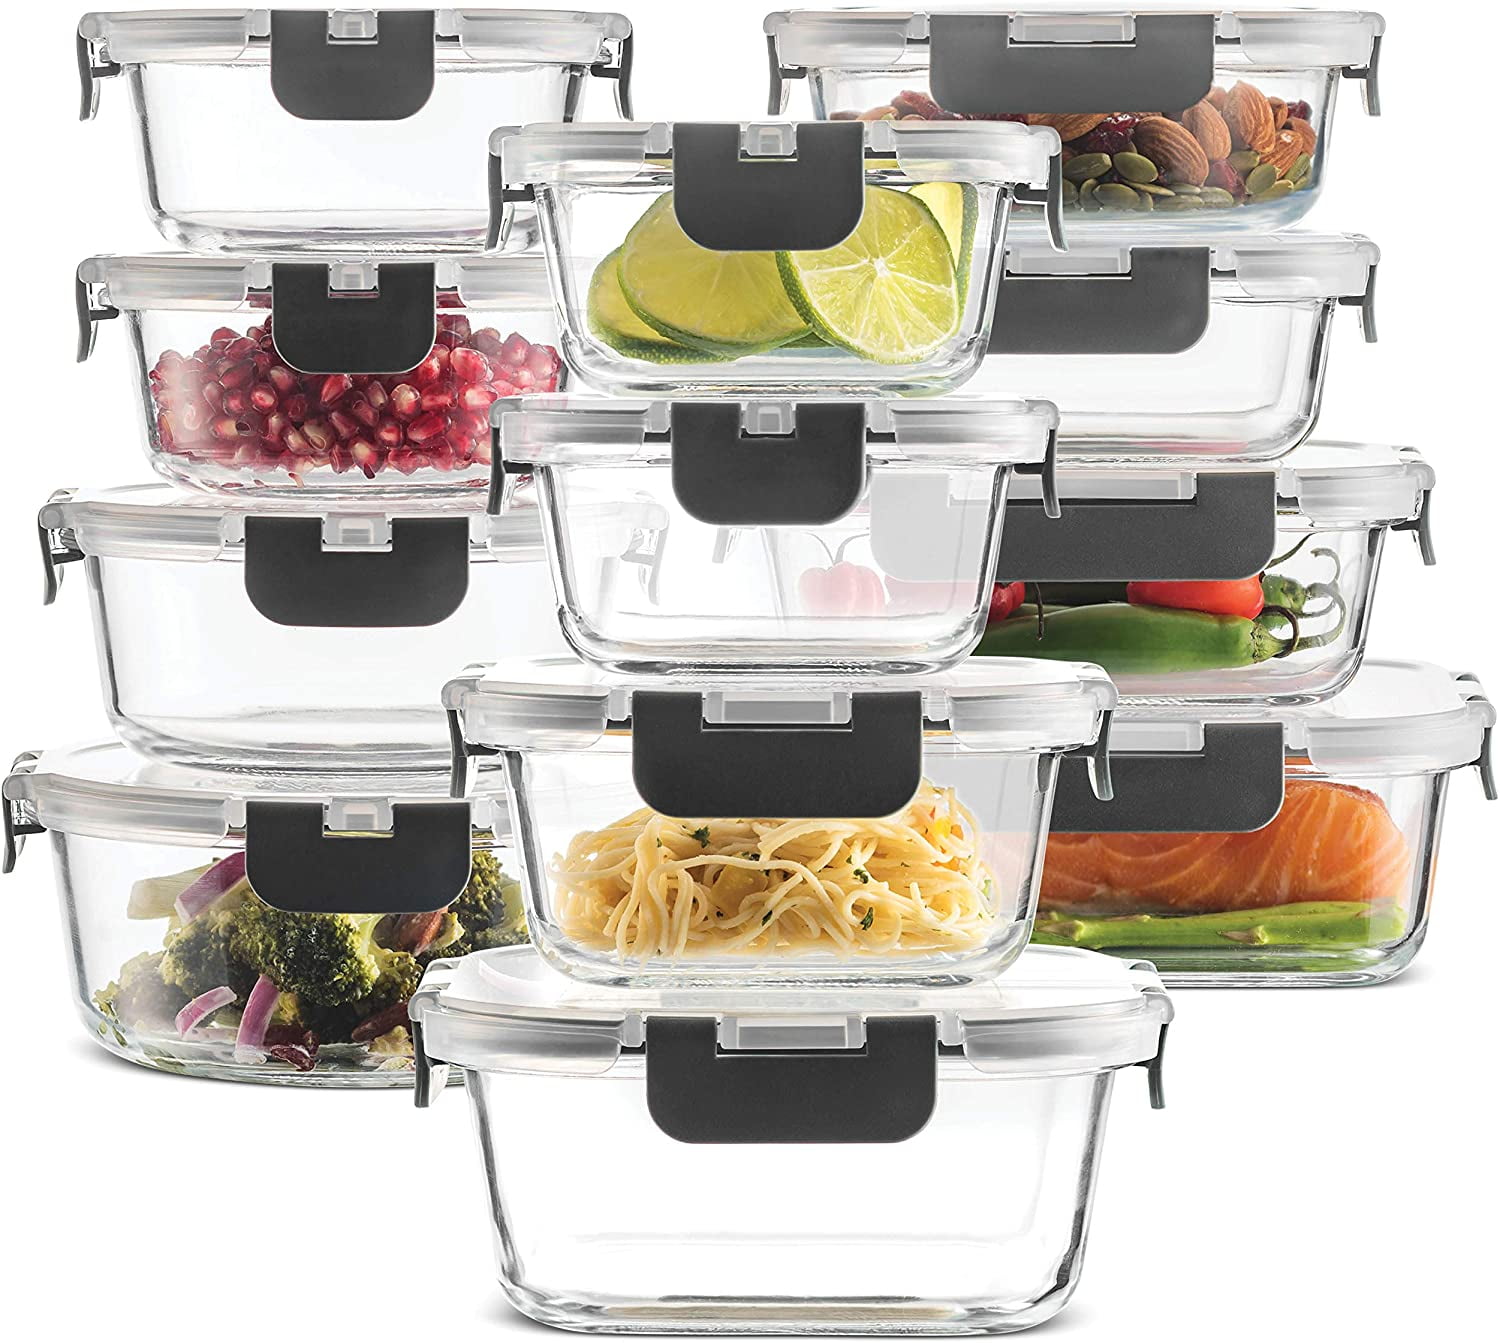 Bayco Glass Food Storage Containers with Lids, [24 Piece] Glass 